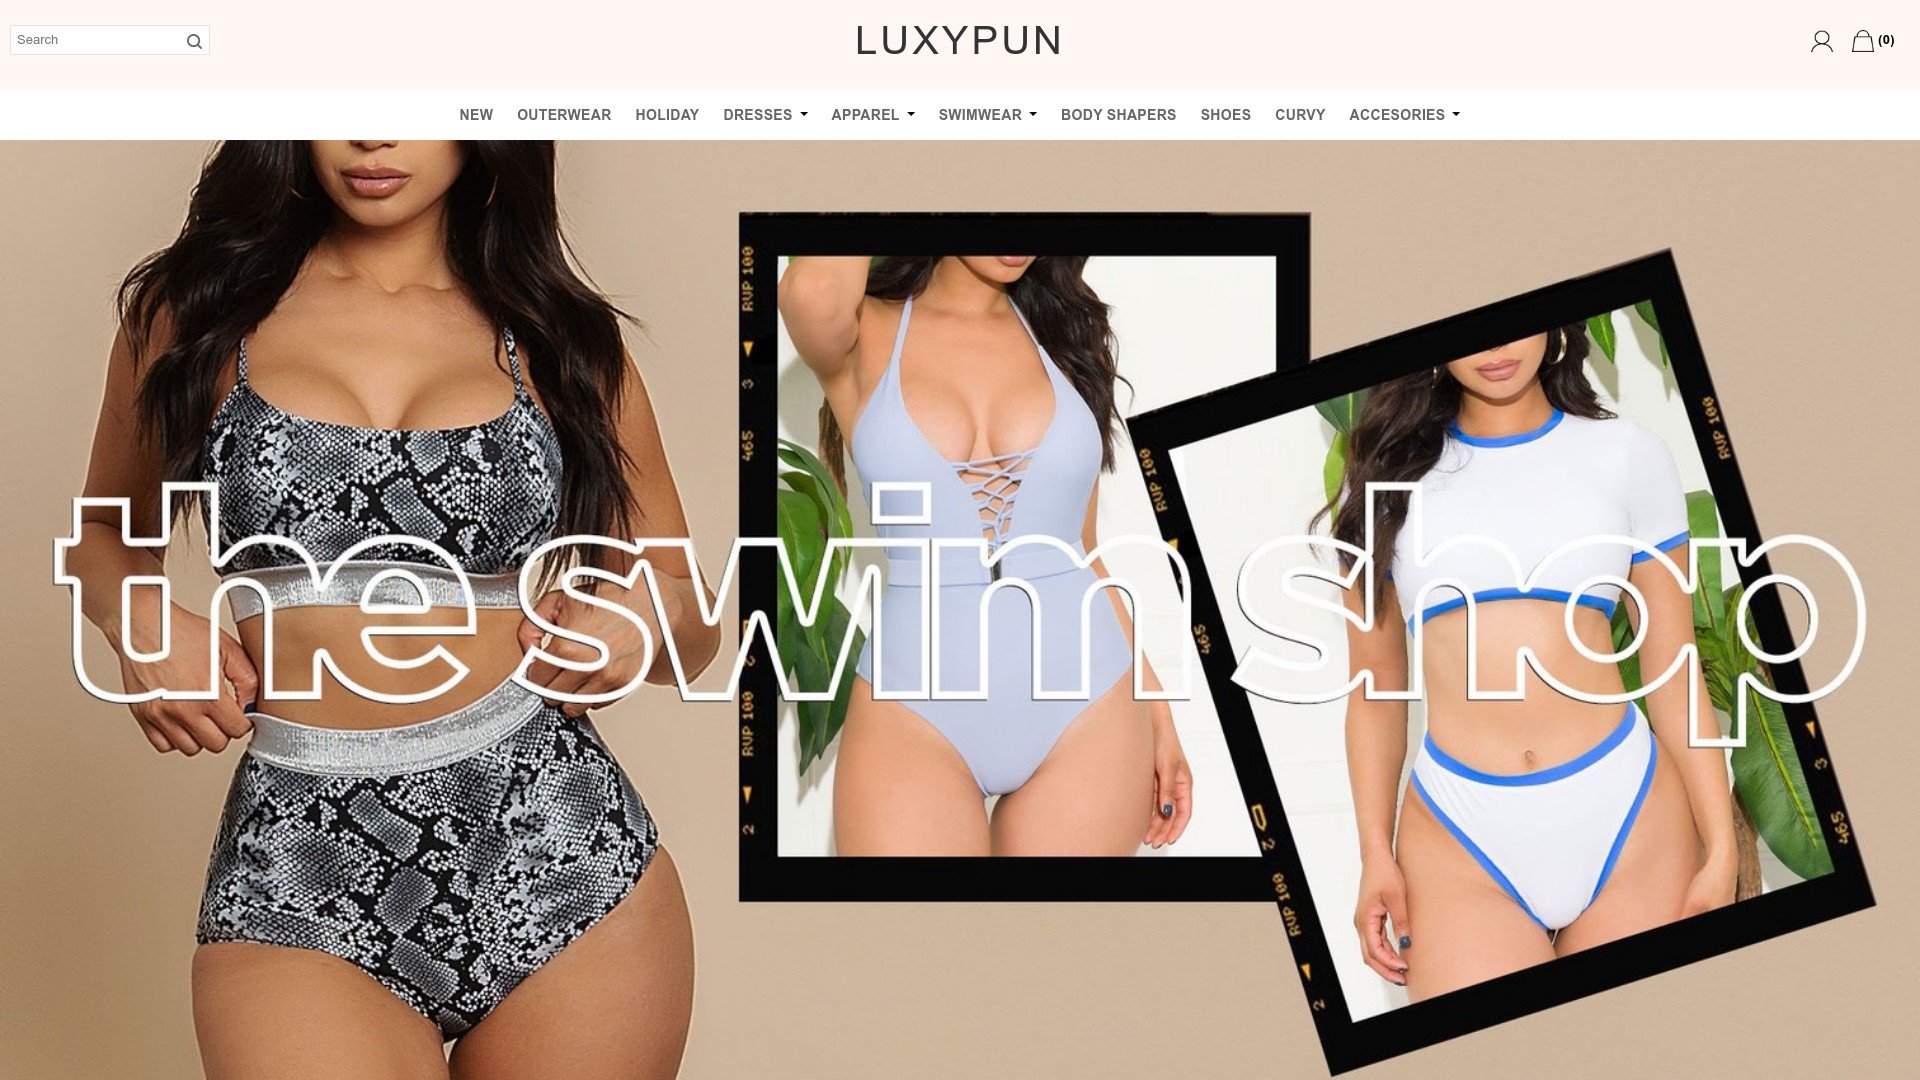 Is Luxypun is a Scam? Review of the Online Store